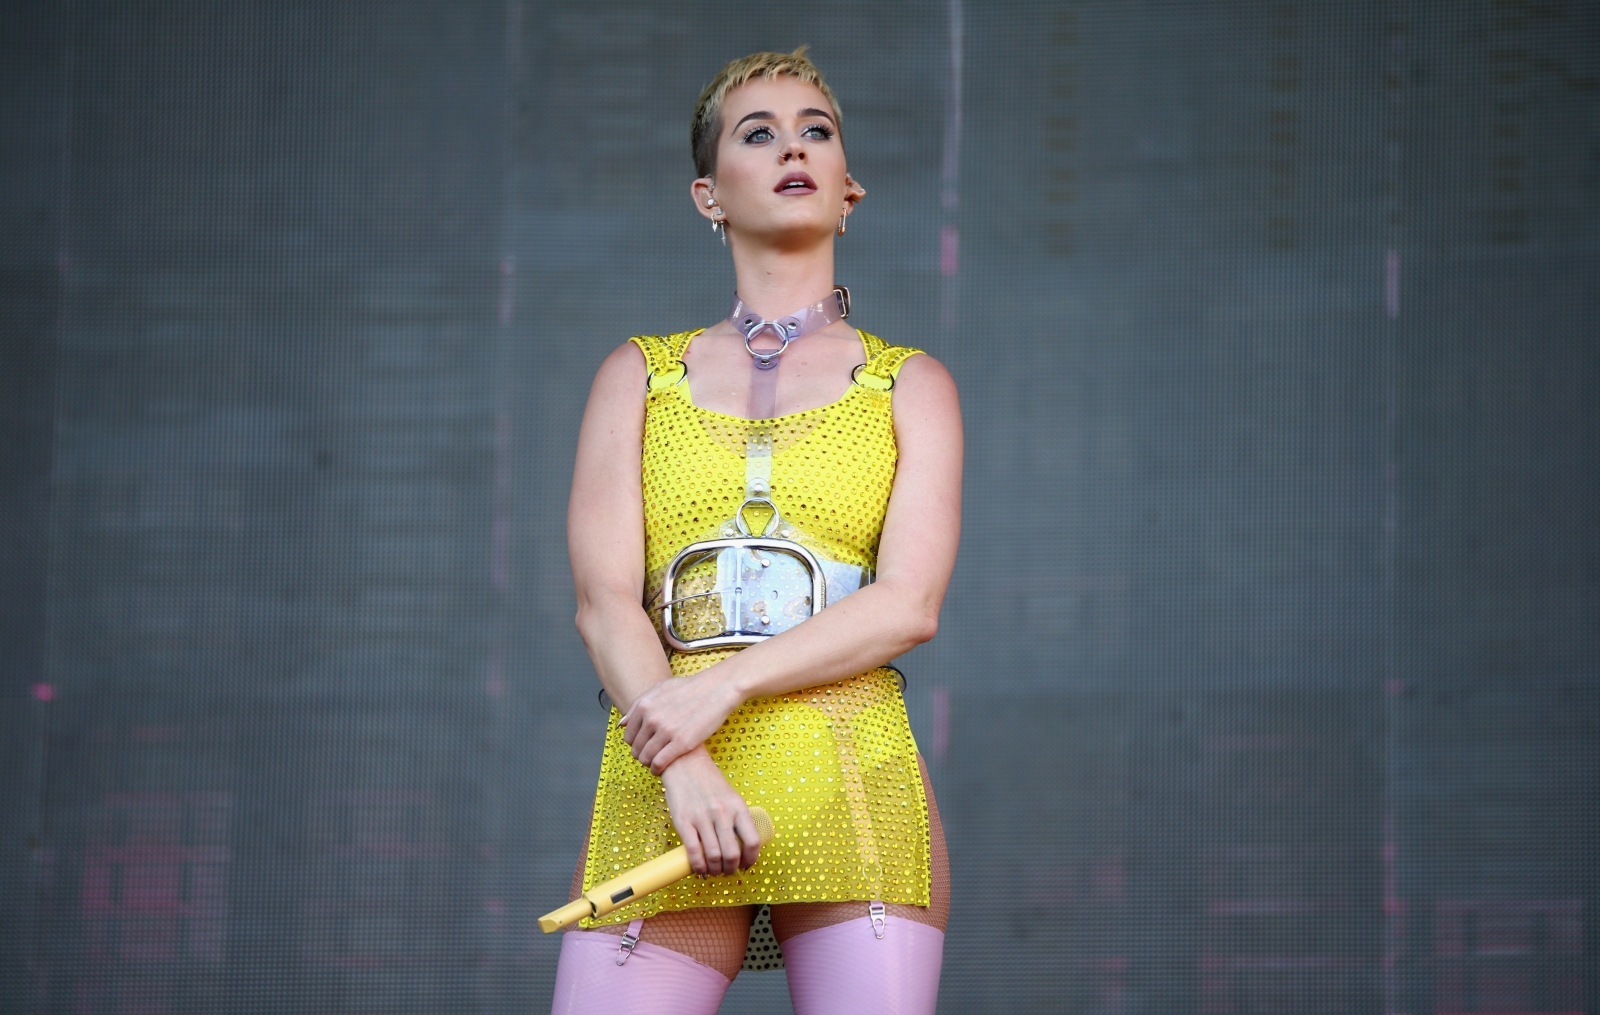 Katy Perry Accidentally Flashes Bare Bum During Witness Live Stream